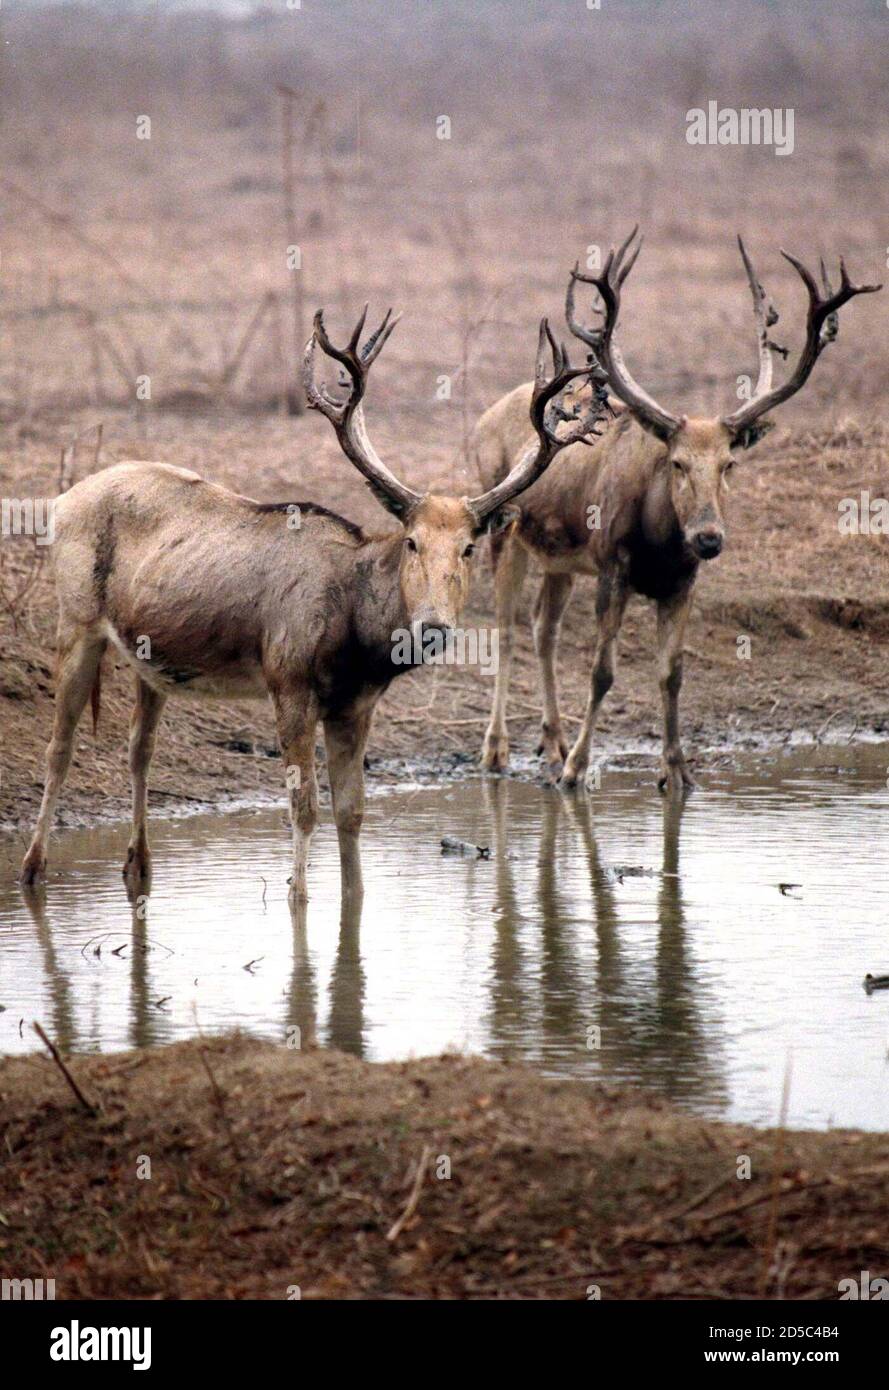 A pair of David's deer wade through a small lake in an animal park south of Beijing November 15. David's deer is named after Pere David, a French Catholic priest and naturalist who first recorded the existence of the unique deer in China in 1865. The protected animal was native to China until the early years of the 20th century. In 1985, the Marquess of Tavistock of England sent 20 of the rare animals to Beijing where they are now being raised.  NB/FY/KM Stock Photo